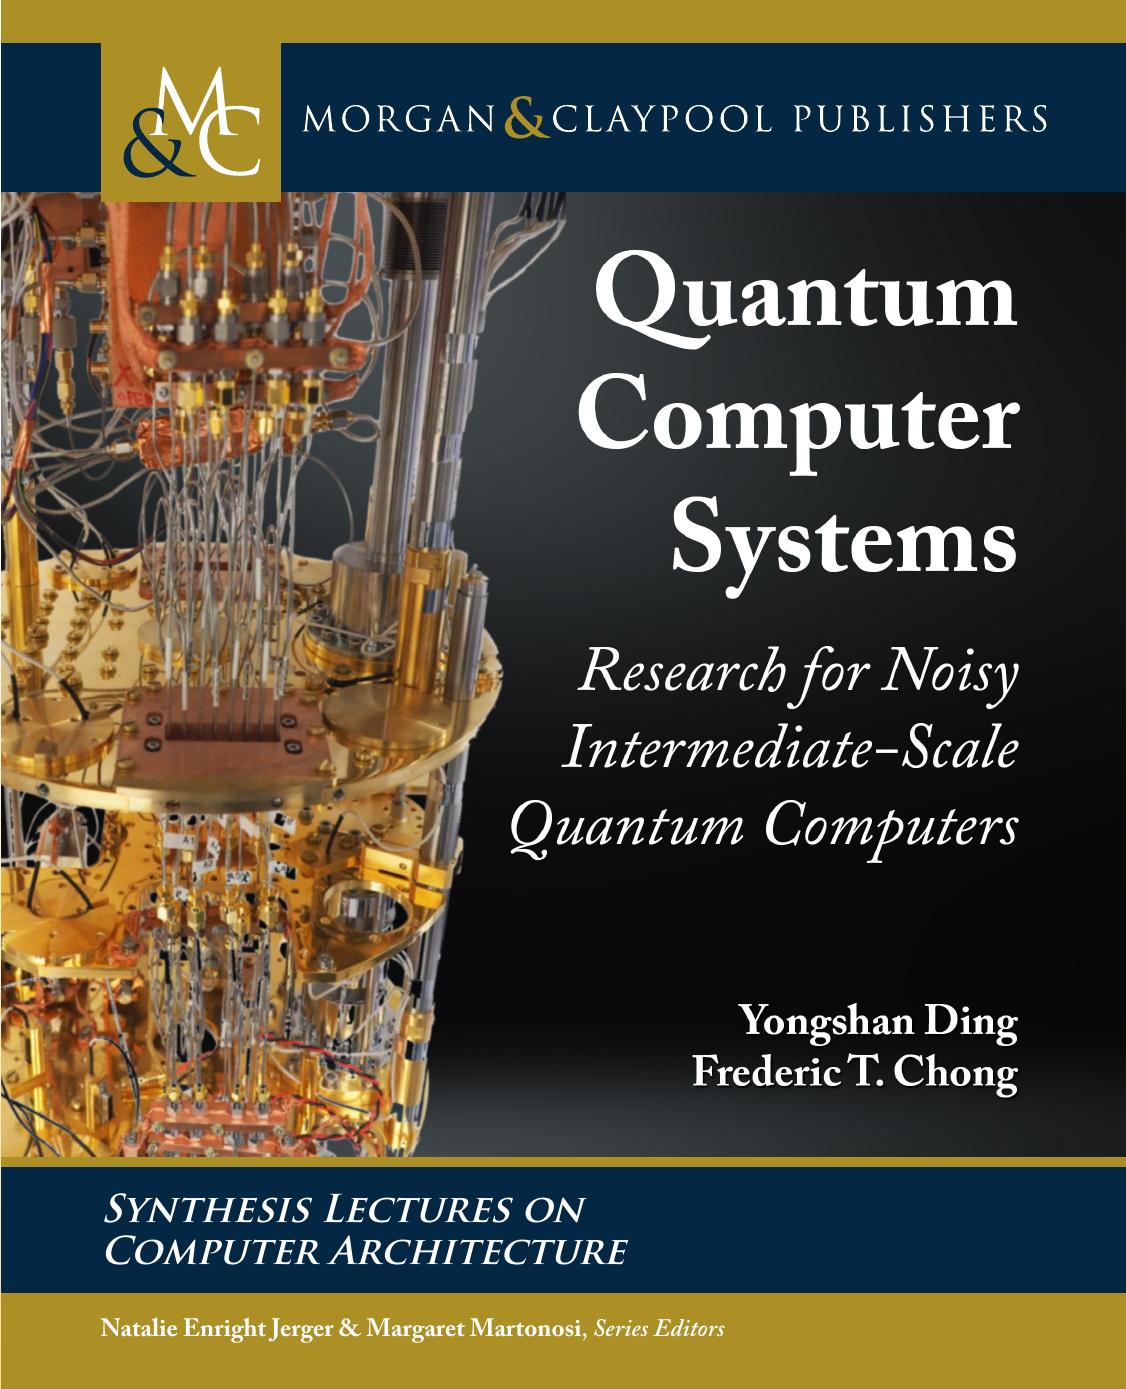 (eBook PDF)Quantum Computer Systems: Research for Noisy Intermediate-Scale Quantum Computers by Yongshan Ding,Frederic T. Chong